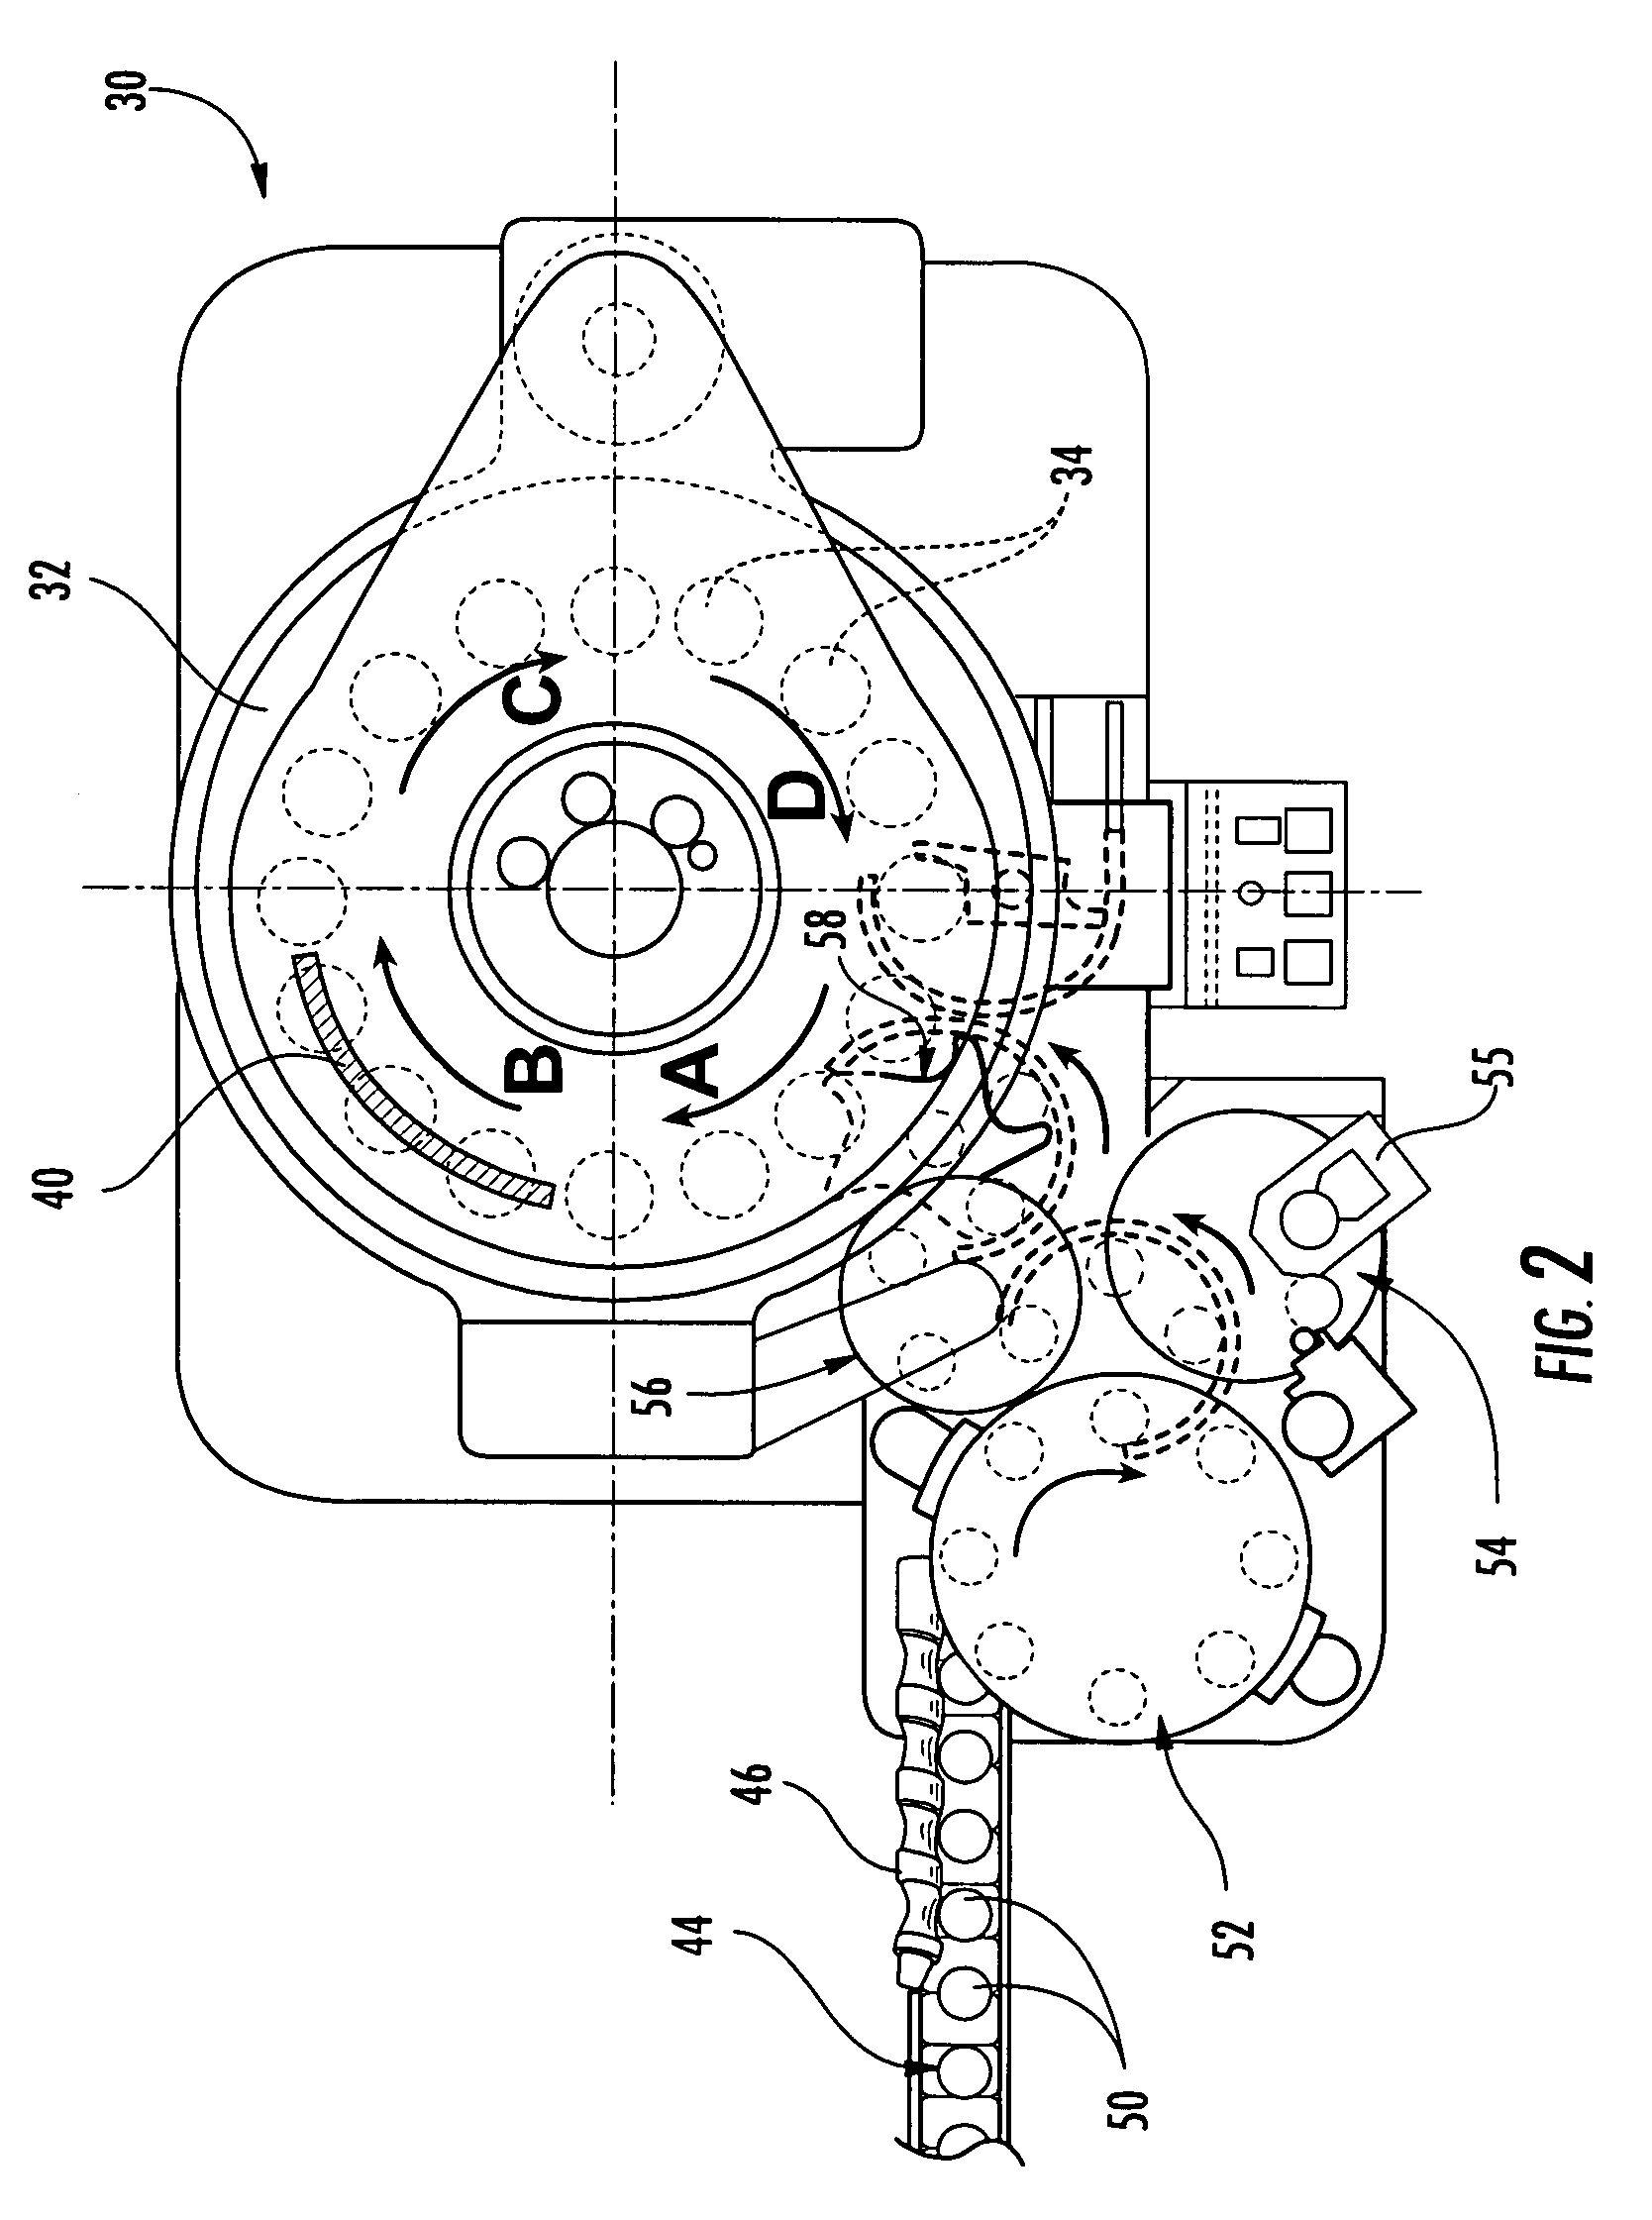 Apparatus and method for seaming a metal end onto a composite can